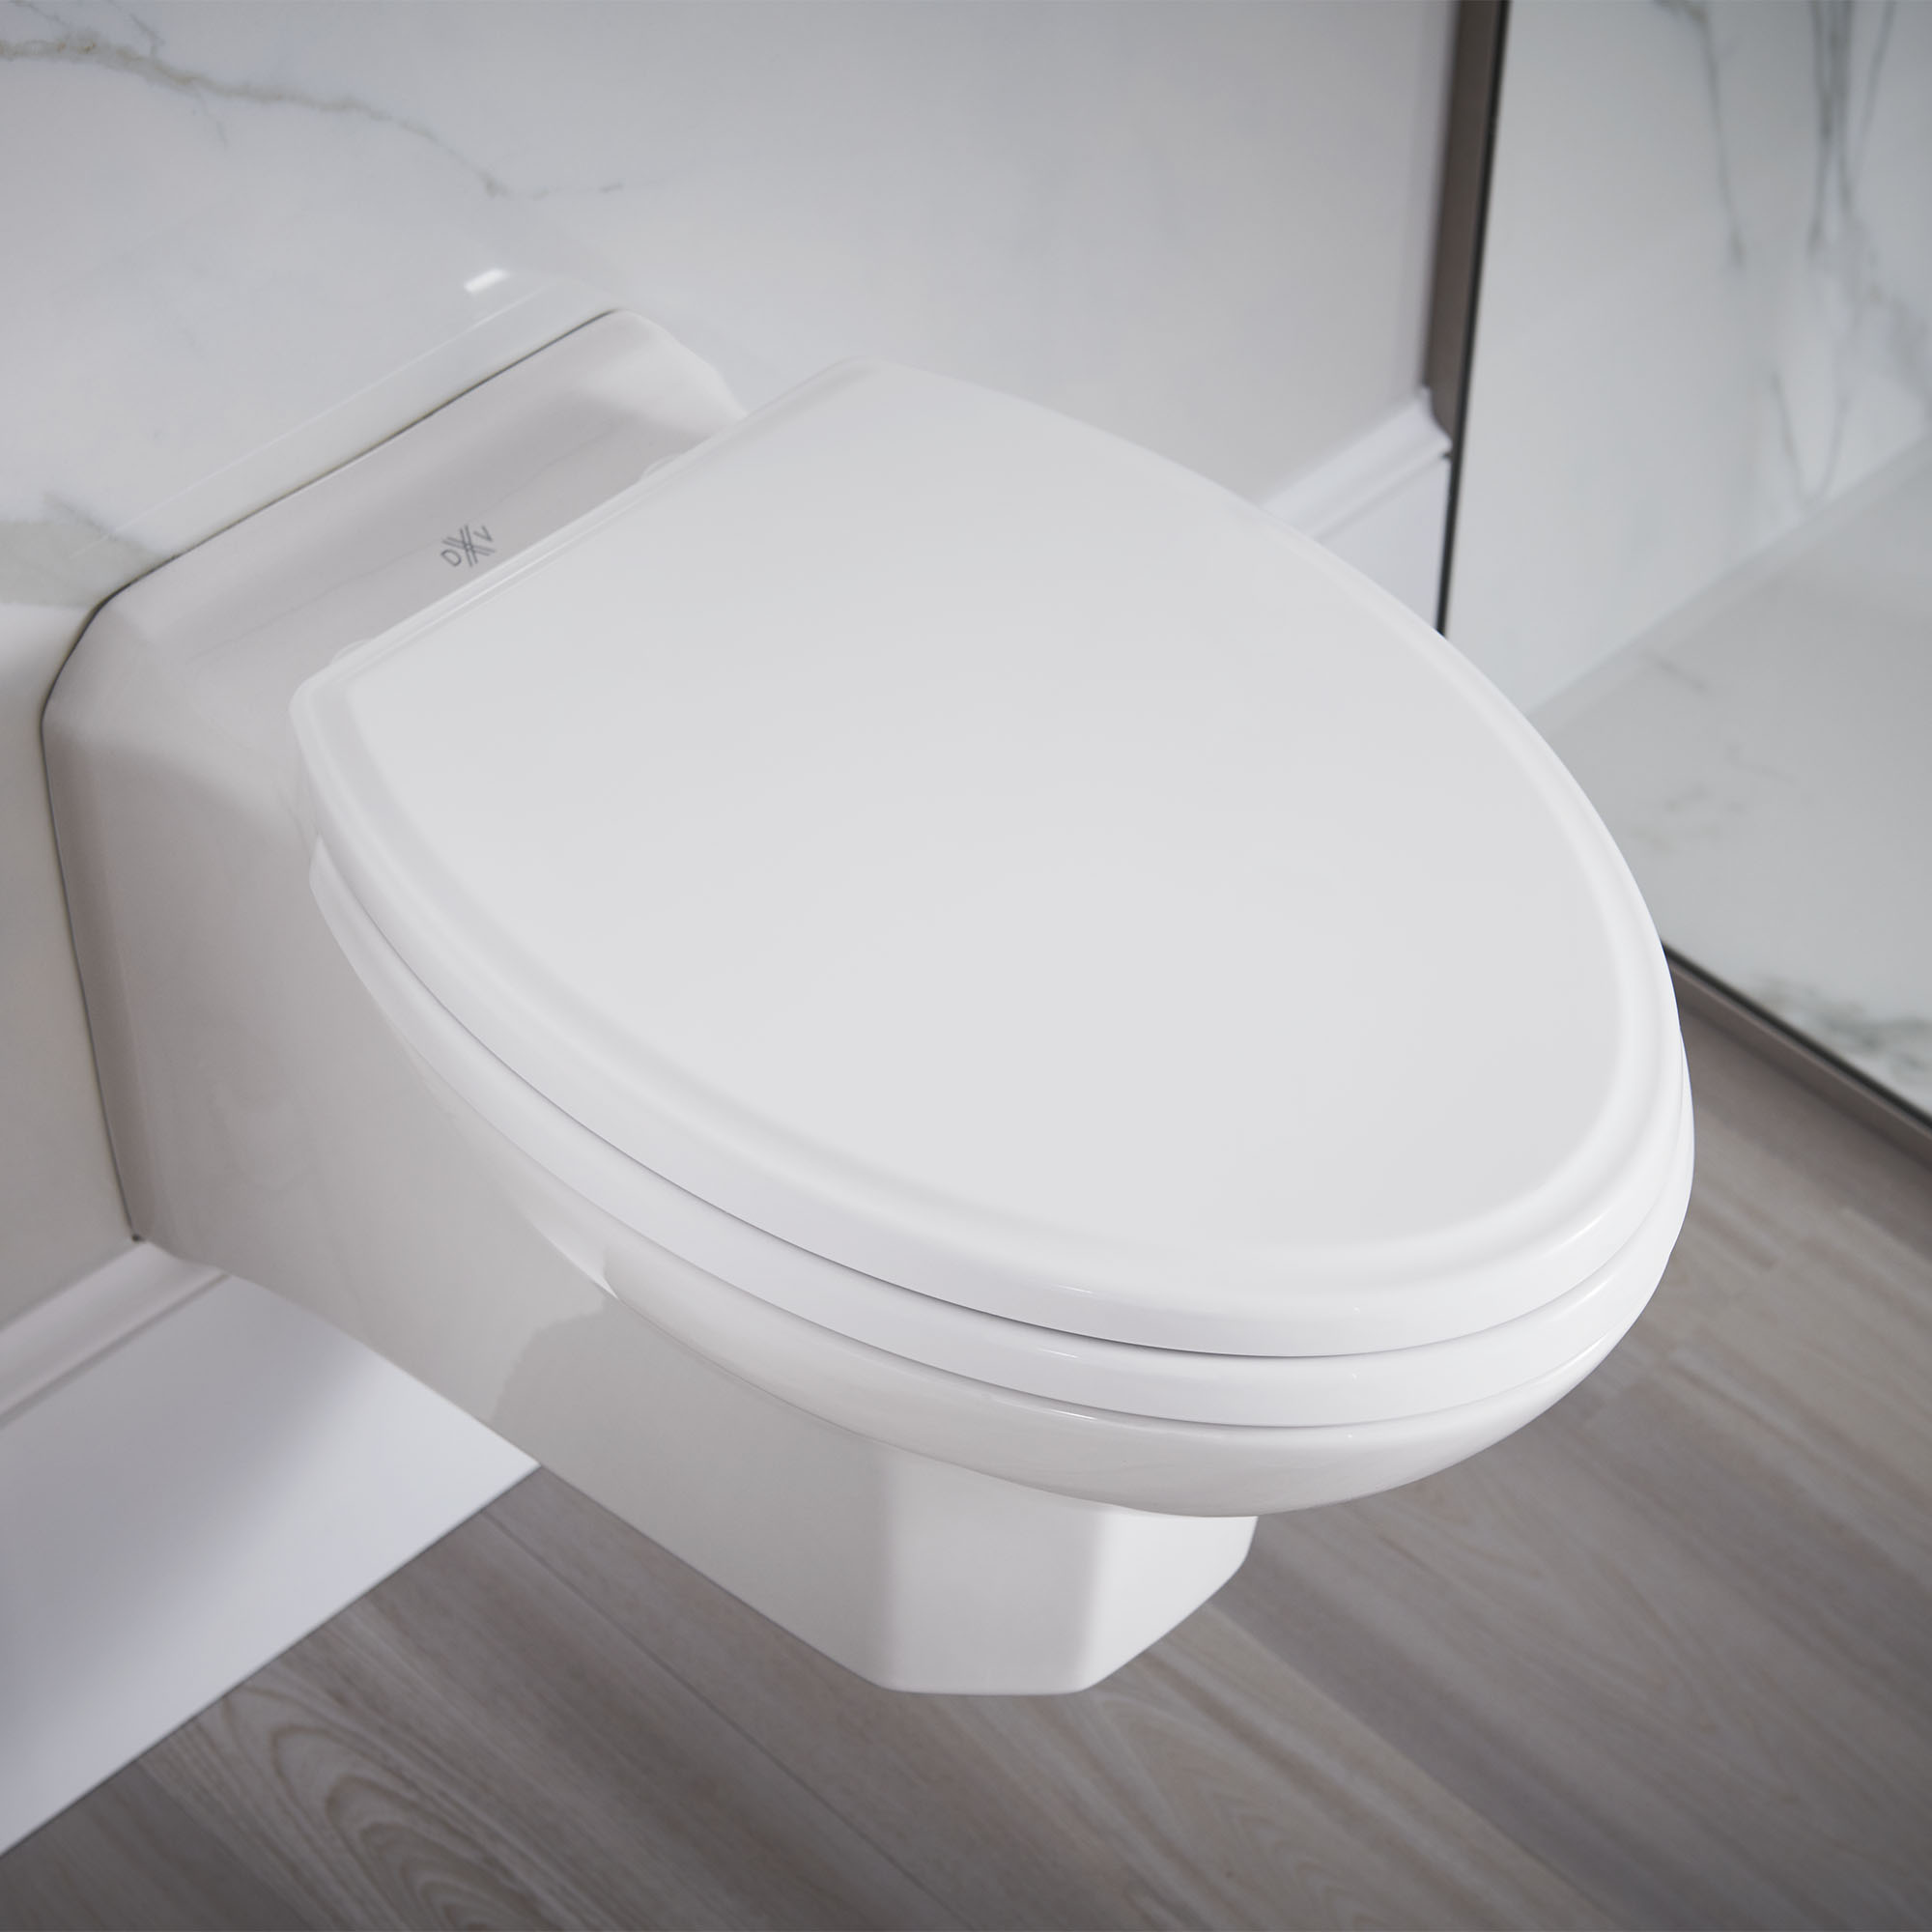 Belshire™ Wall-Hung Elongated Toilet Bowl with Seat